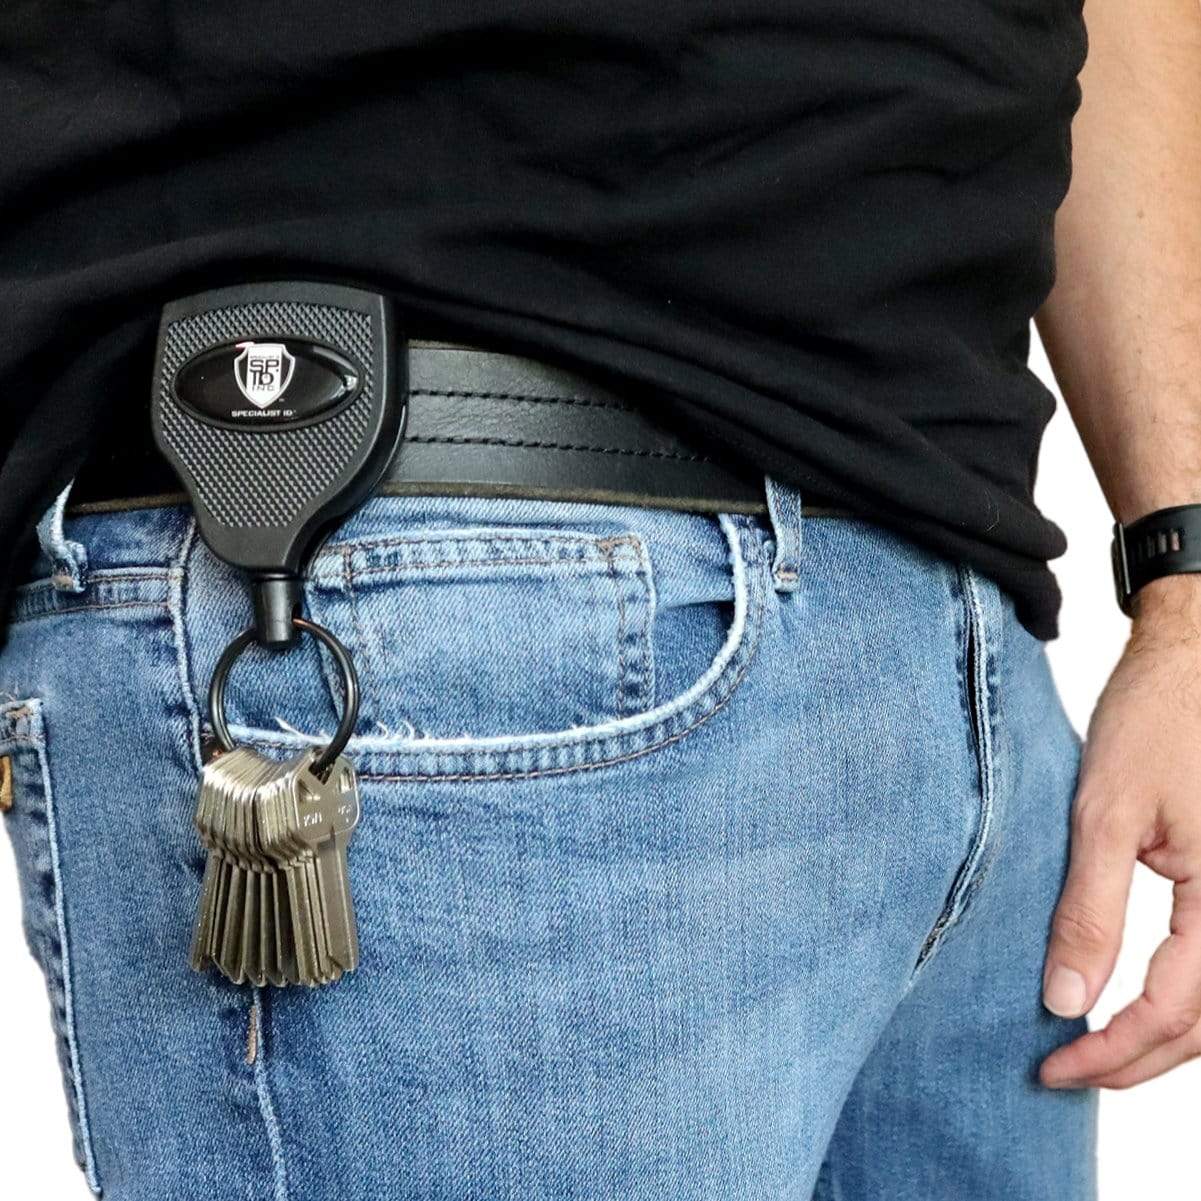 A person wearing blue jeans and a black shirt shows a set of keys attached to a Super Heavy Duty Retractable Keychain - 8oz or 10 Keys - Durable 48” (4 Ft) Kevlar Lanyard.